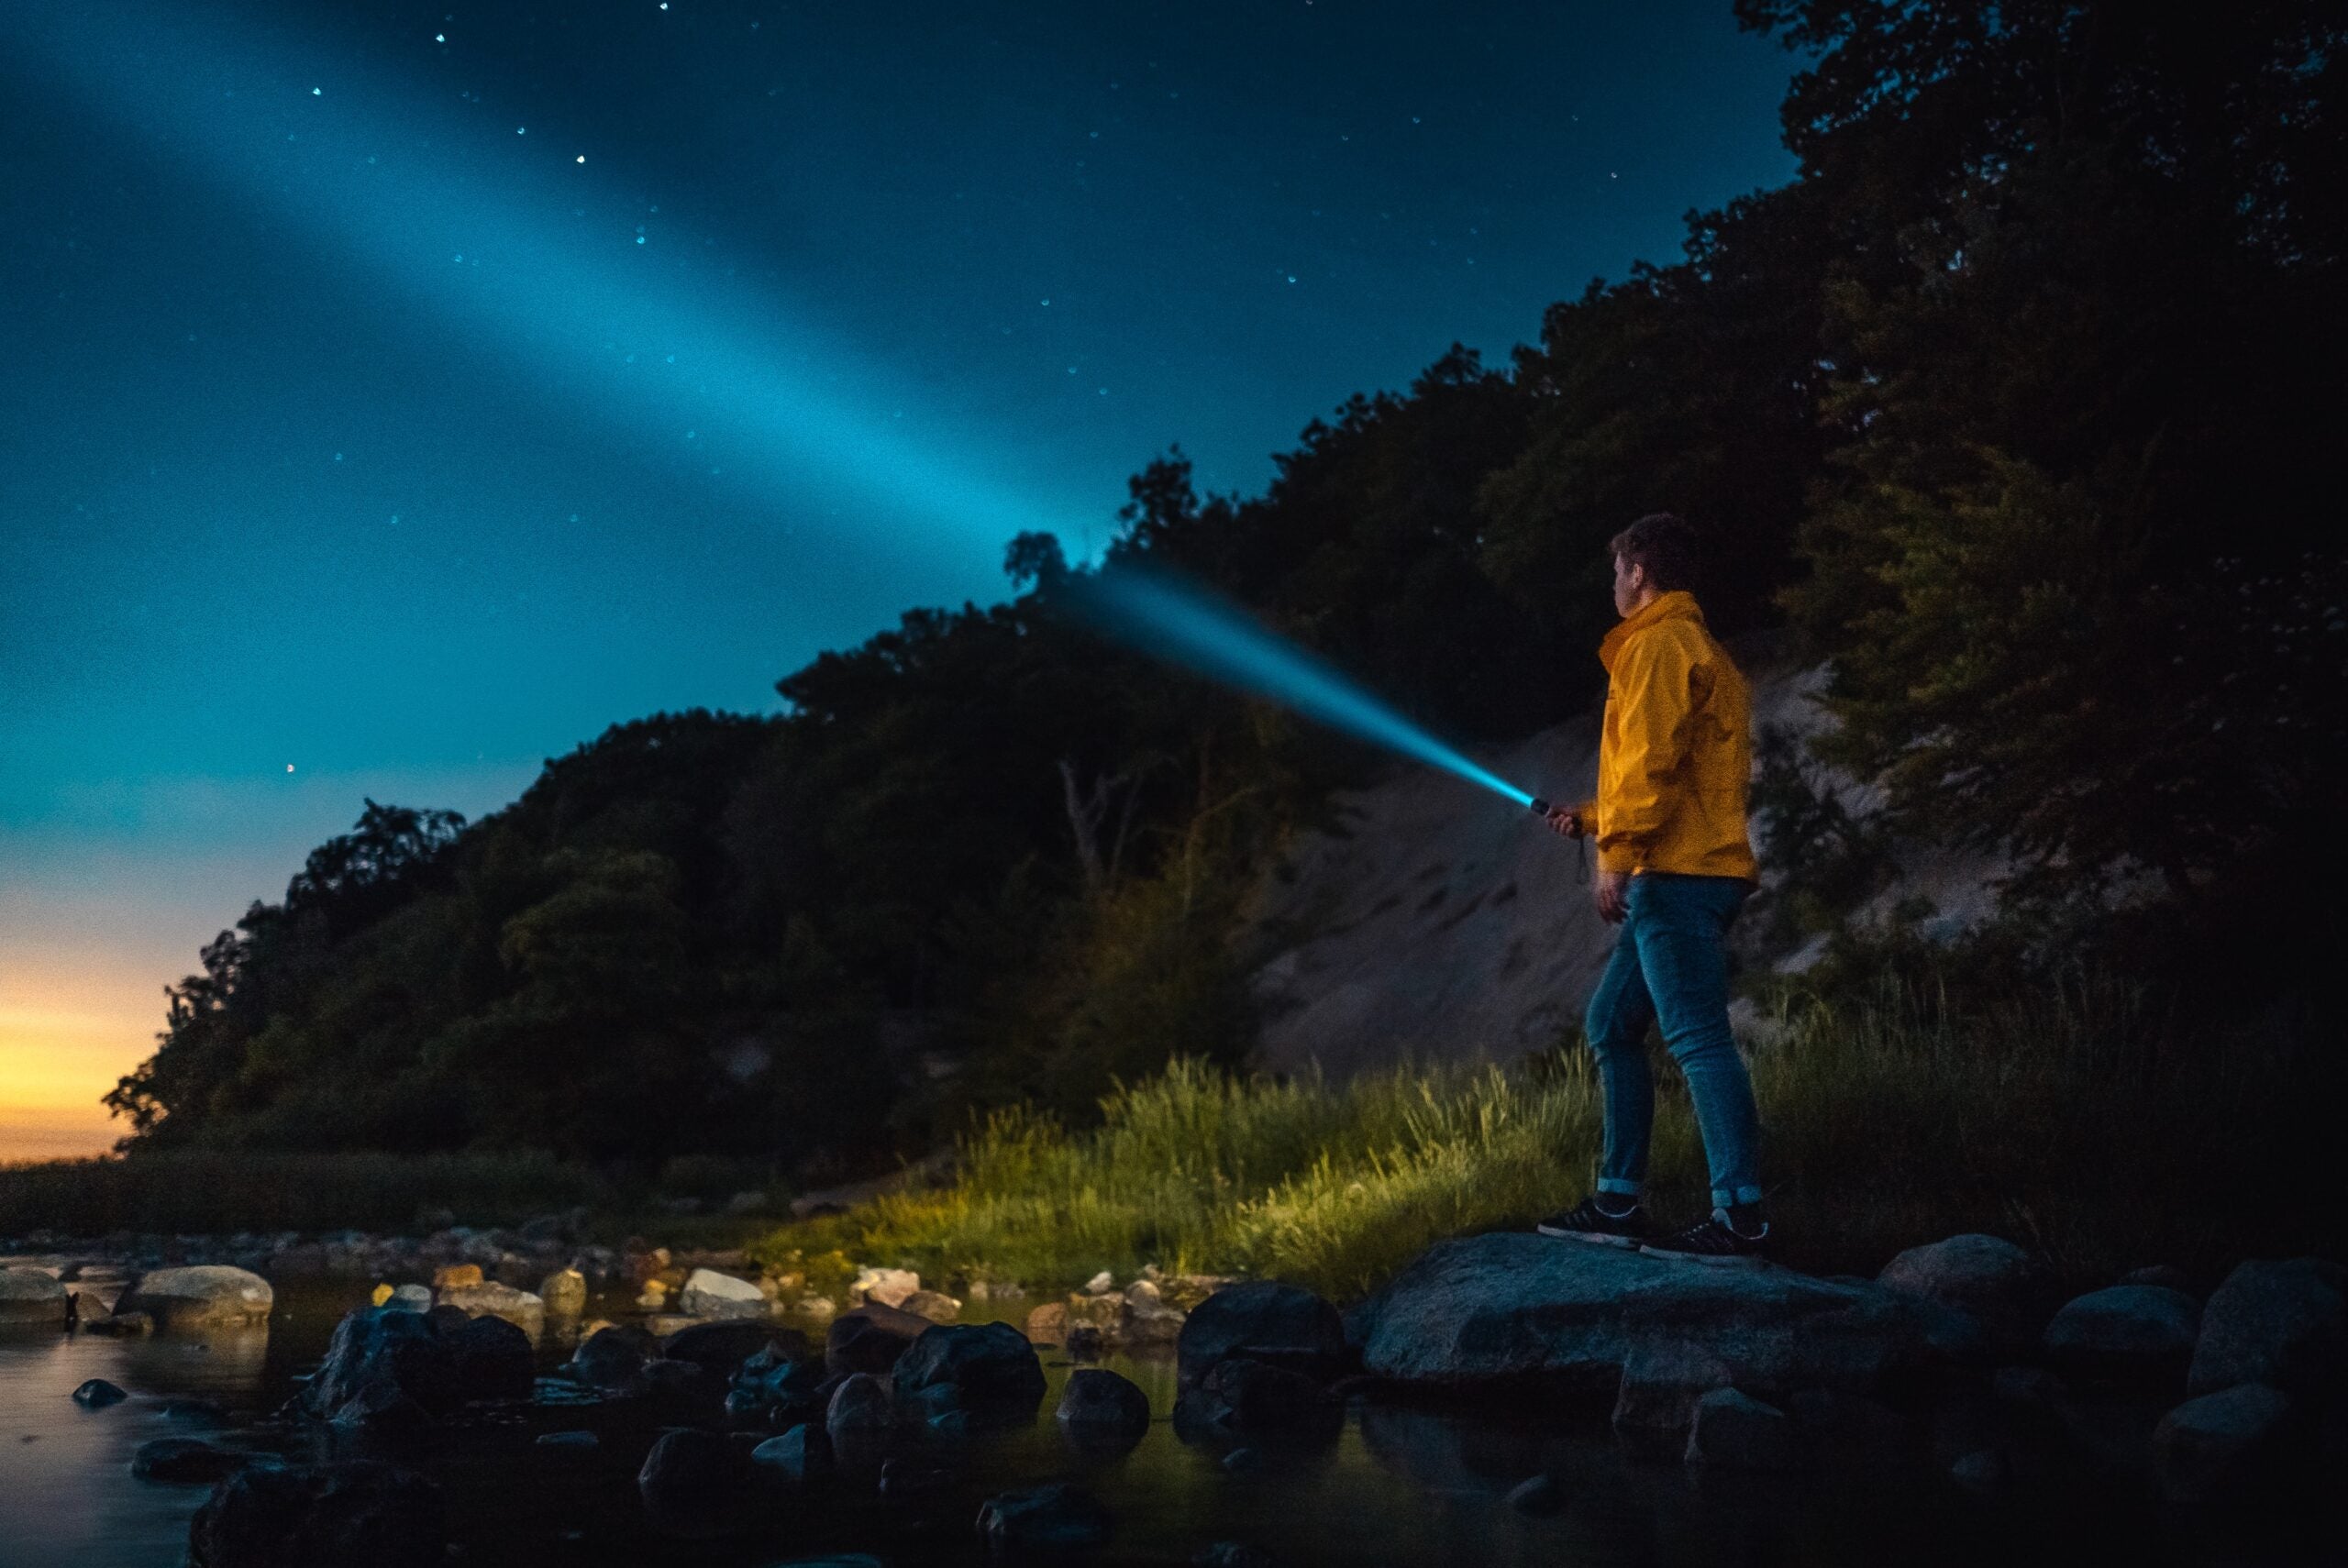 10 Best Flashlights For Camping in 2023